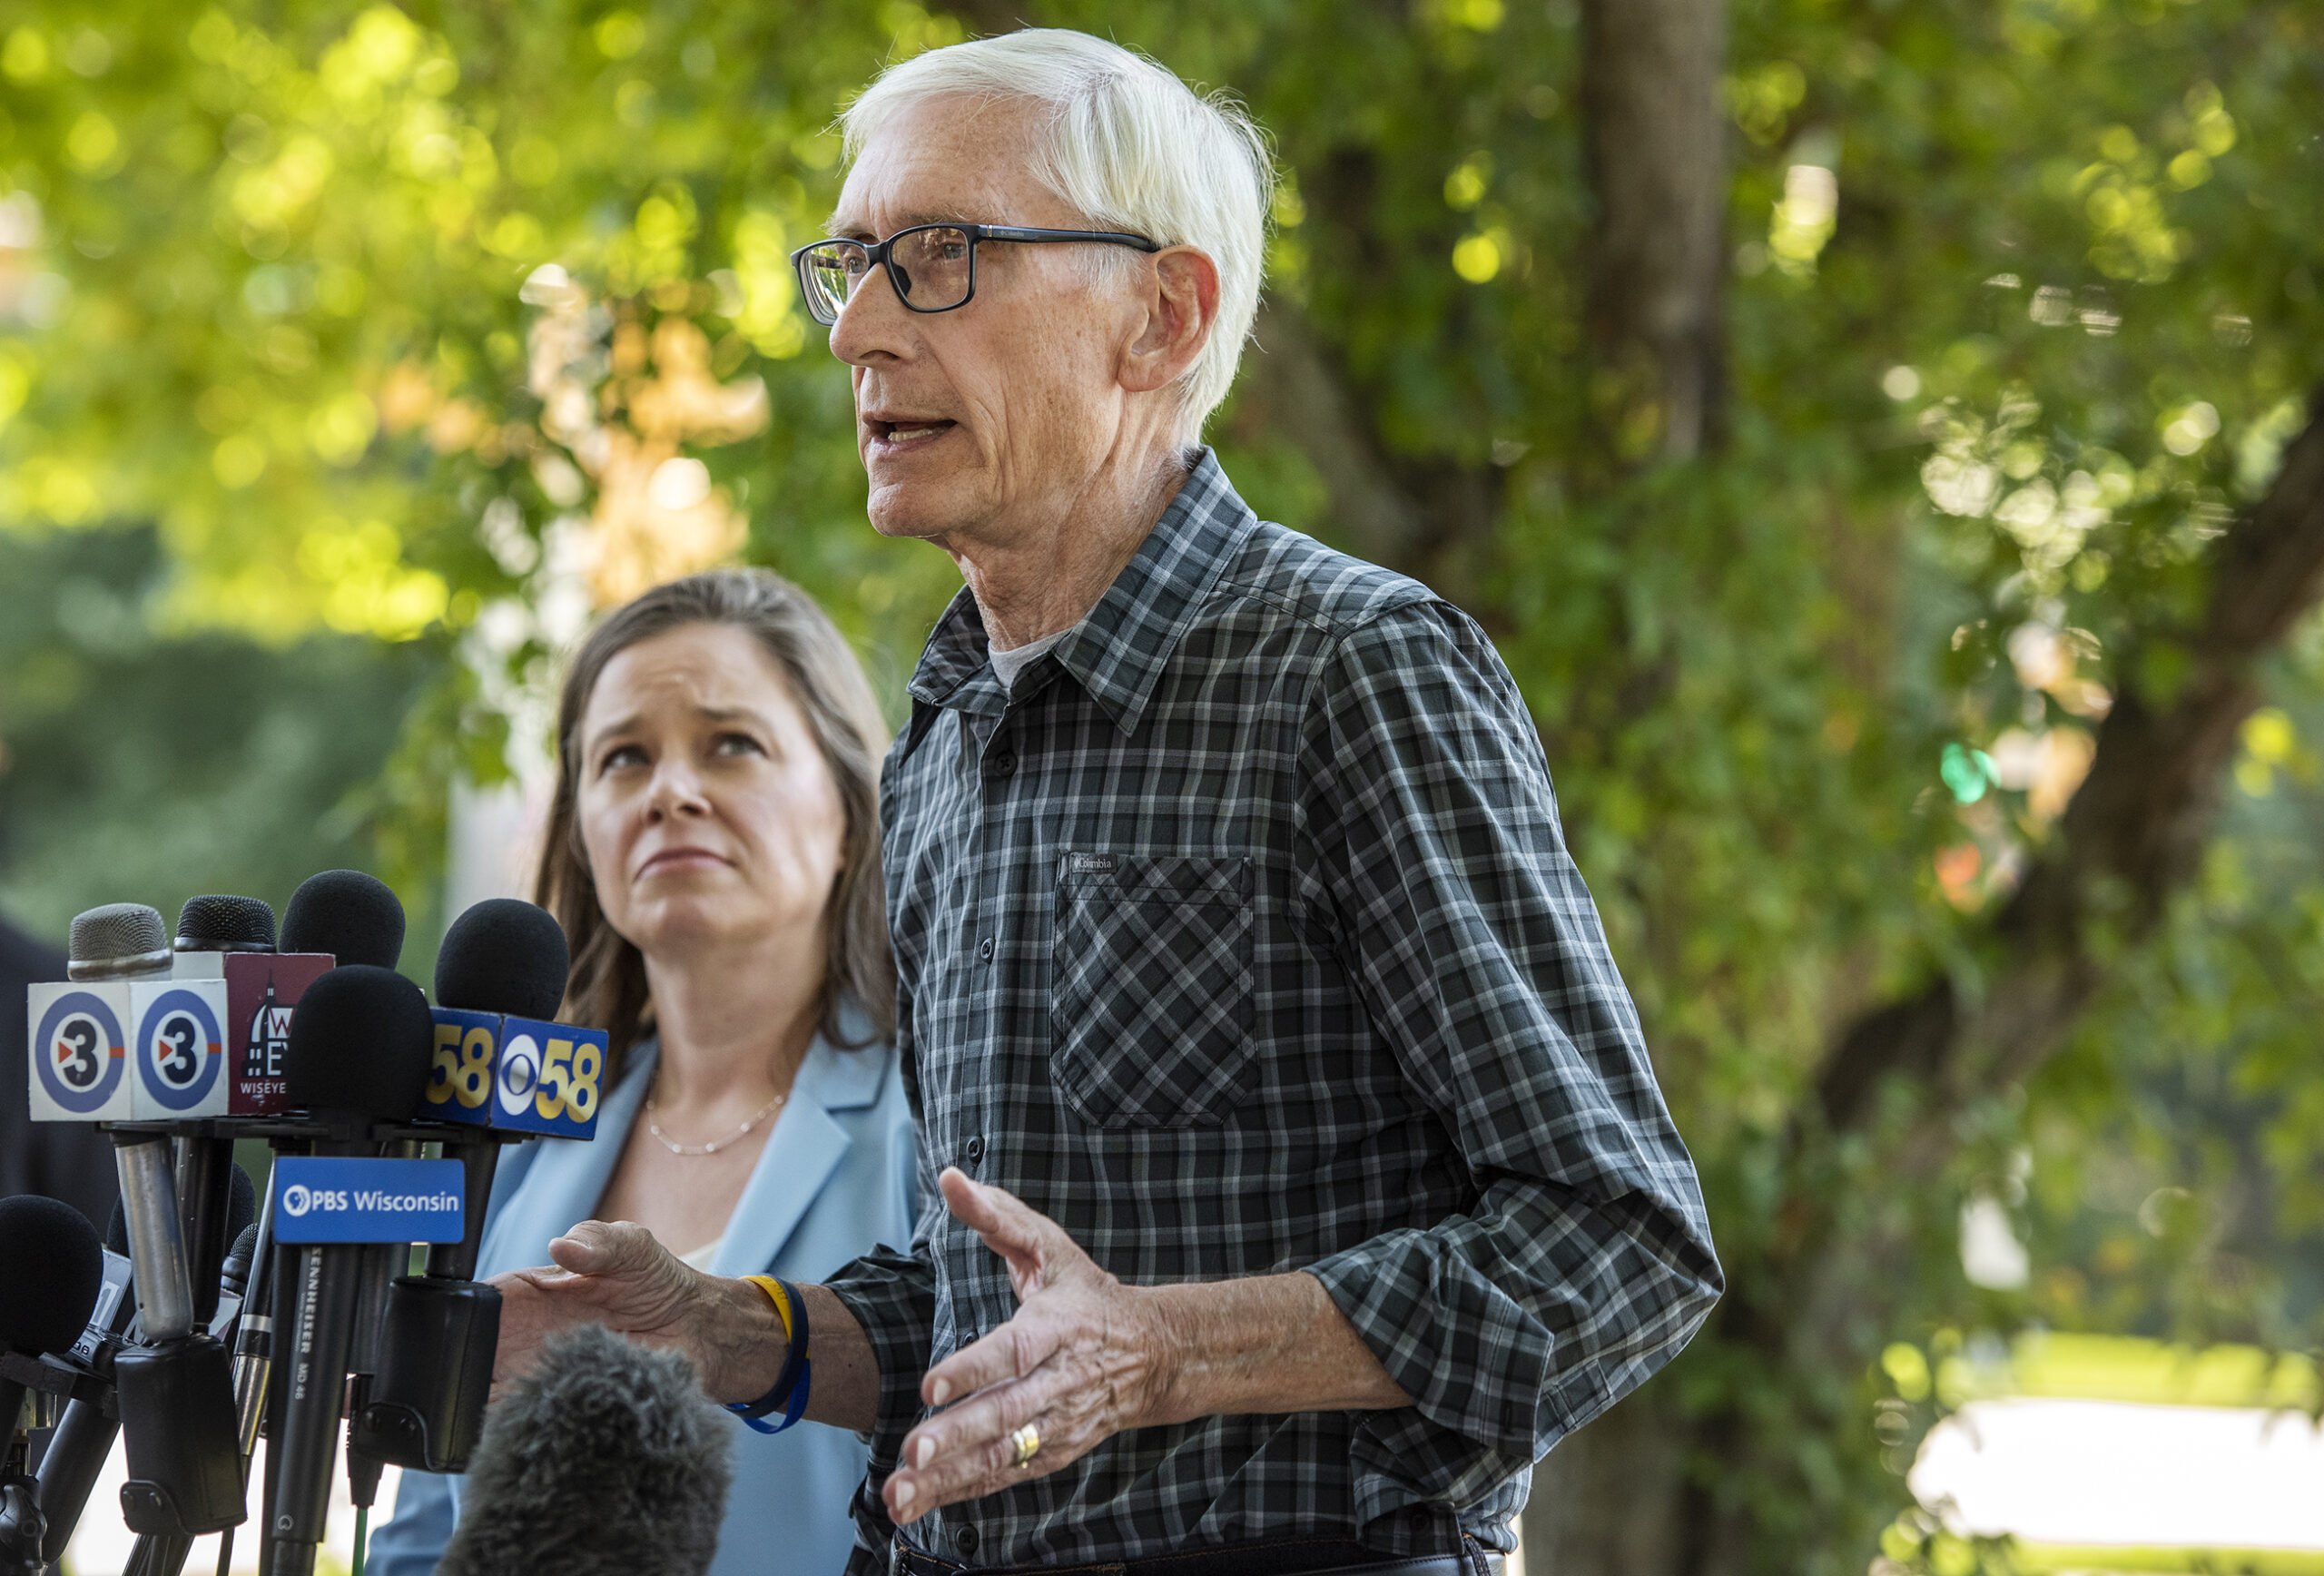 Tony Evers, Tim Michels agree: Evers’ veto pen is the only obstacle for more than 100 GOP bills